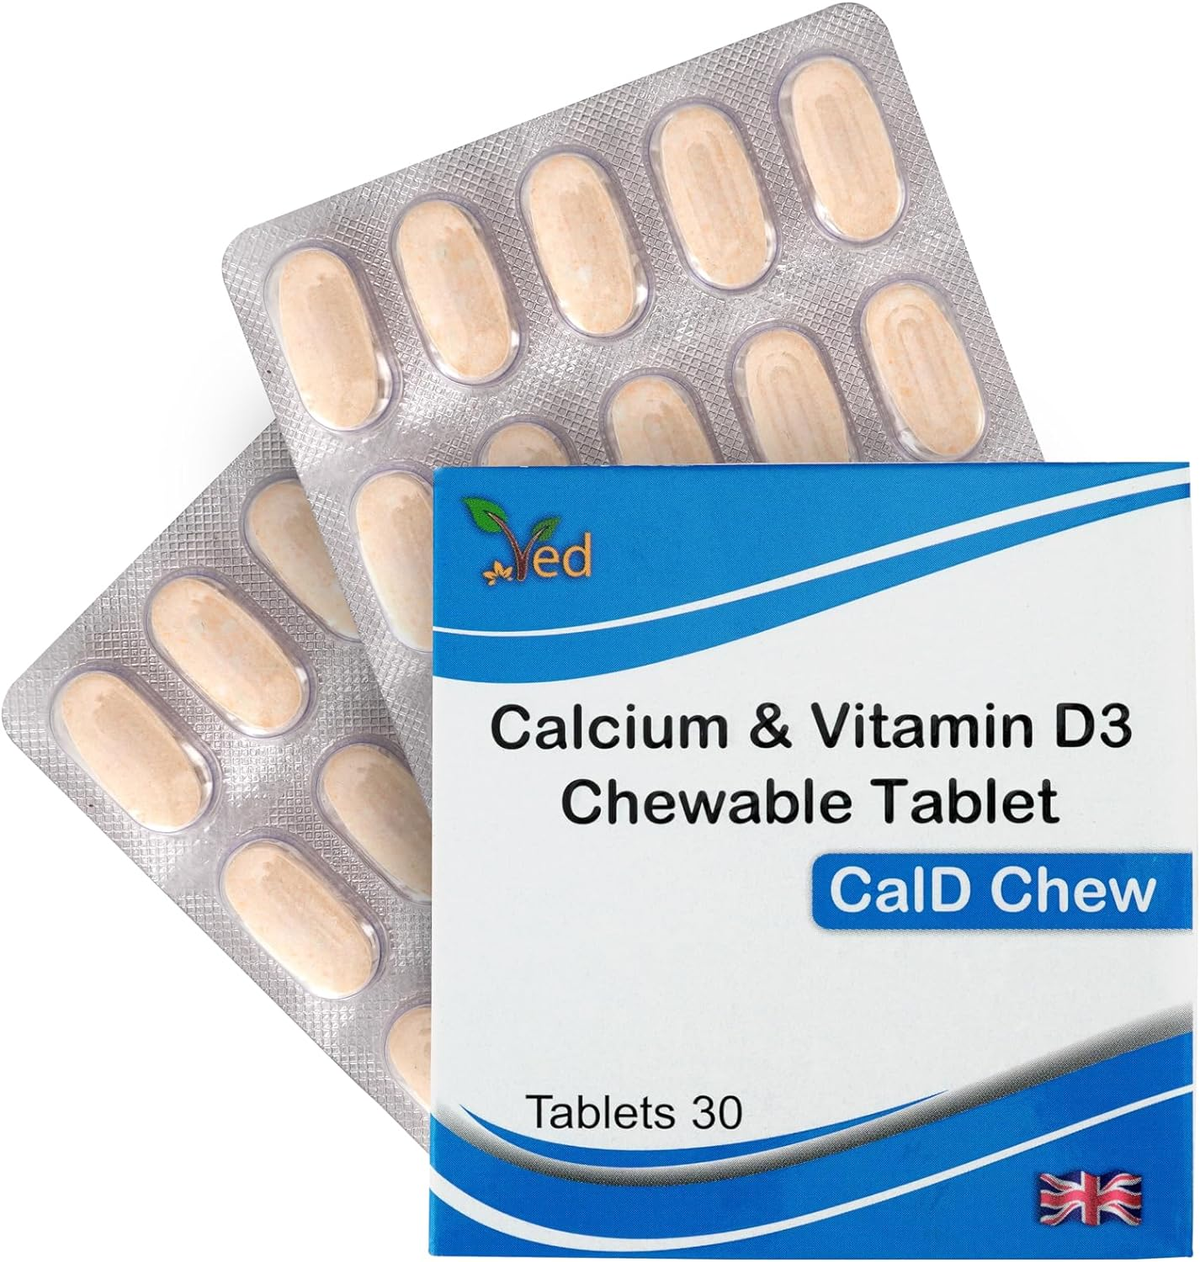 VED CALCIUM & D3 CHEWABLE TABLET (15X2)